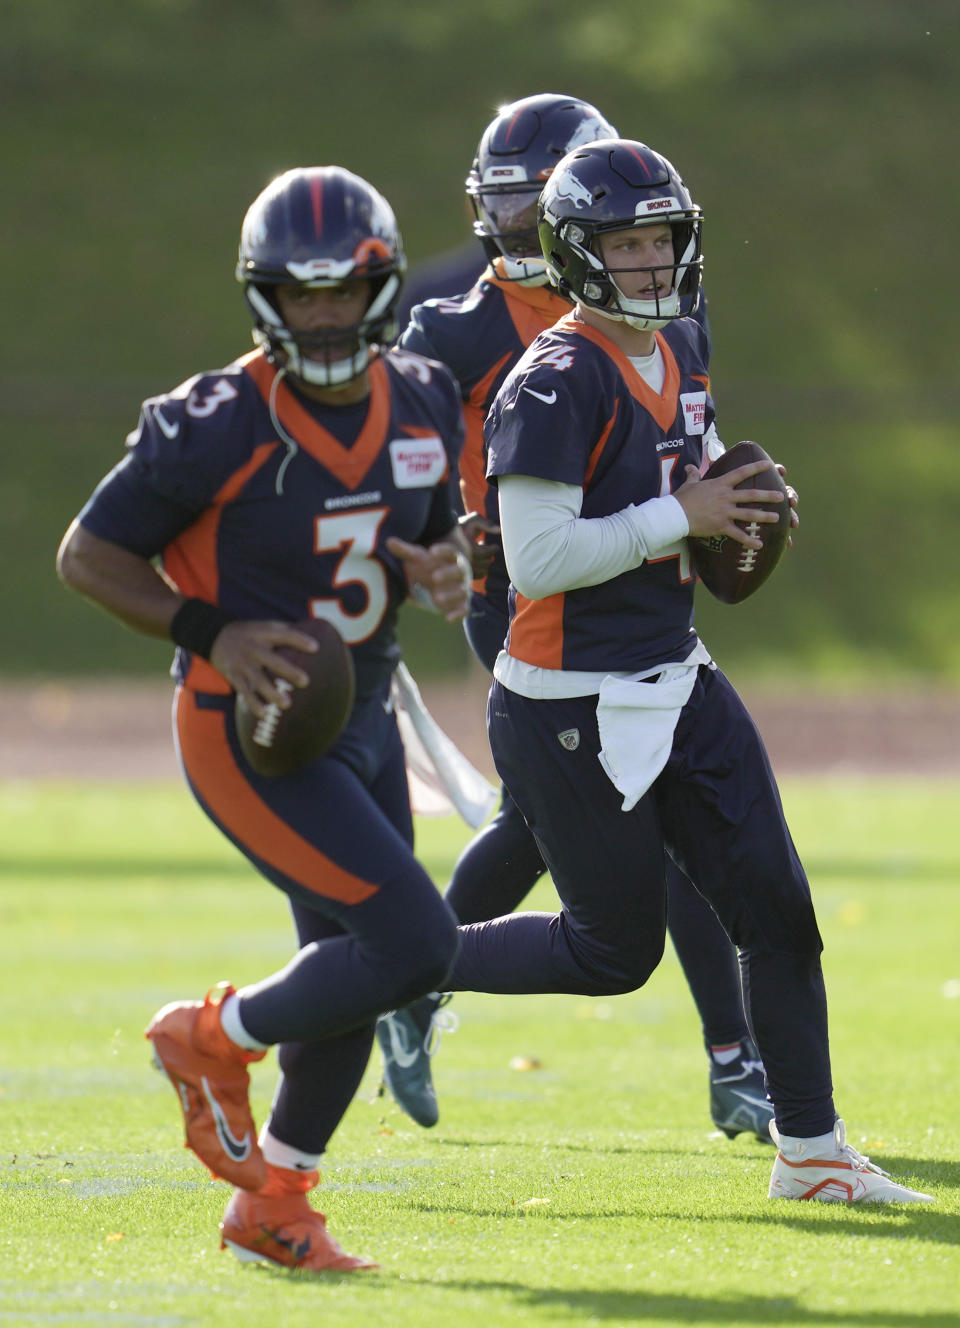 Denver Broncos quarterbacks, Russell Wilson, left, and Brett Rypien, attend a practice session in Harrow, England, Wednesday, Oct. 26, 2022 ahead the NFL game against Jacksonville Jaguars at the Wembley stadium on Sunday. (AP Photo/Kin Cheung)